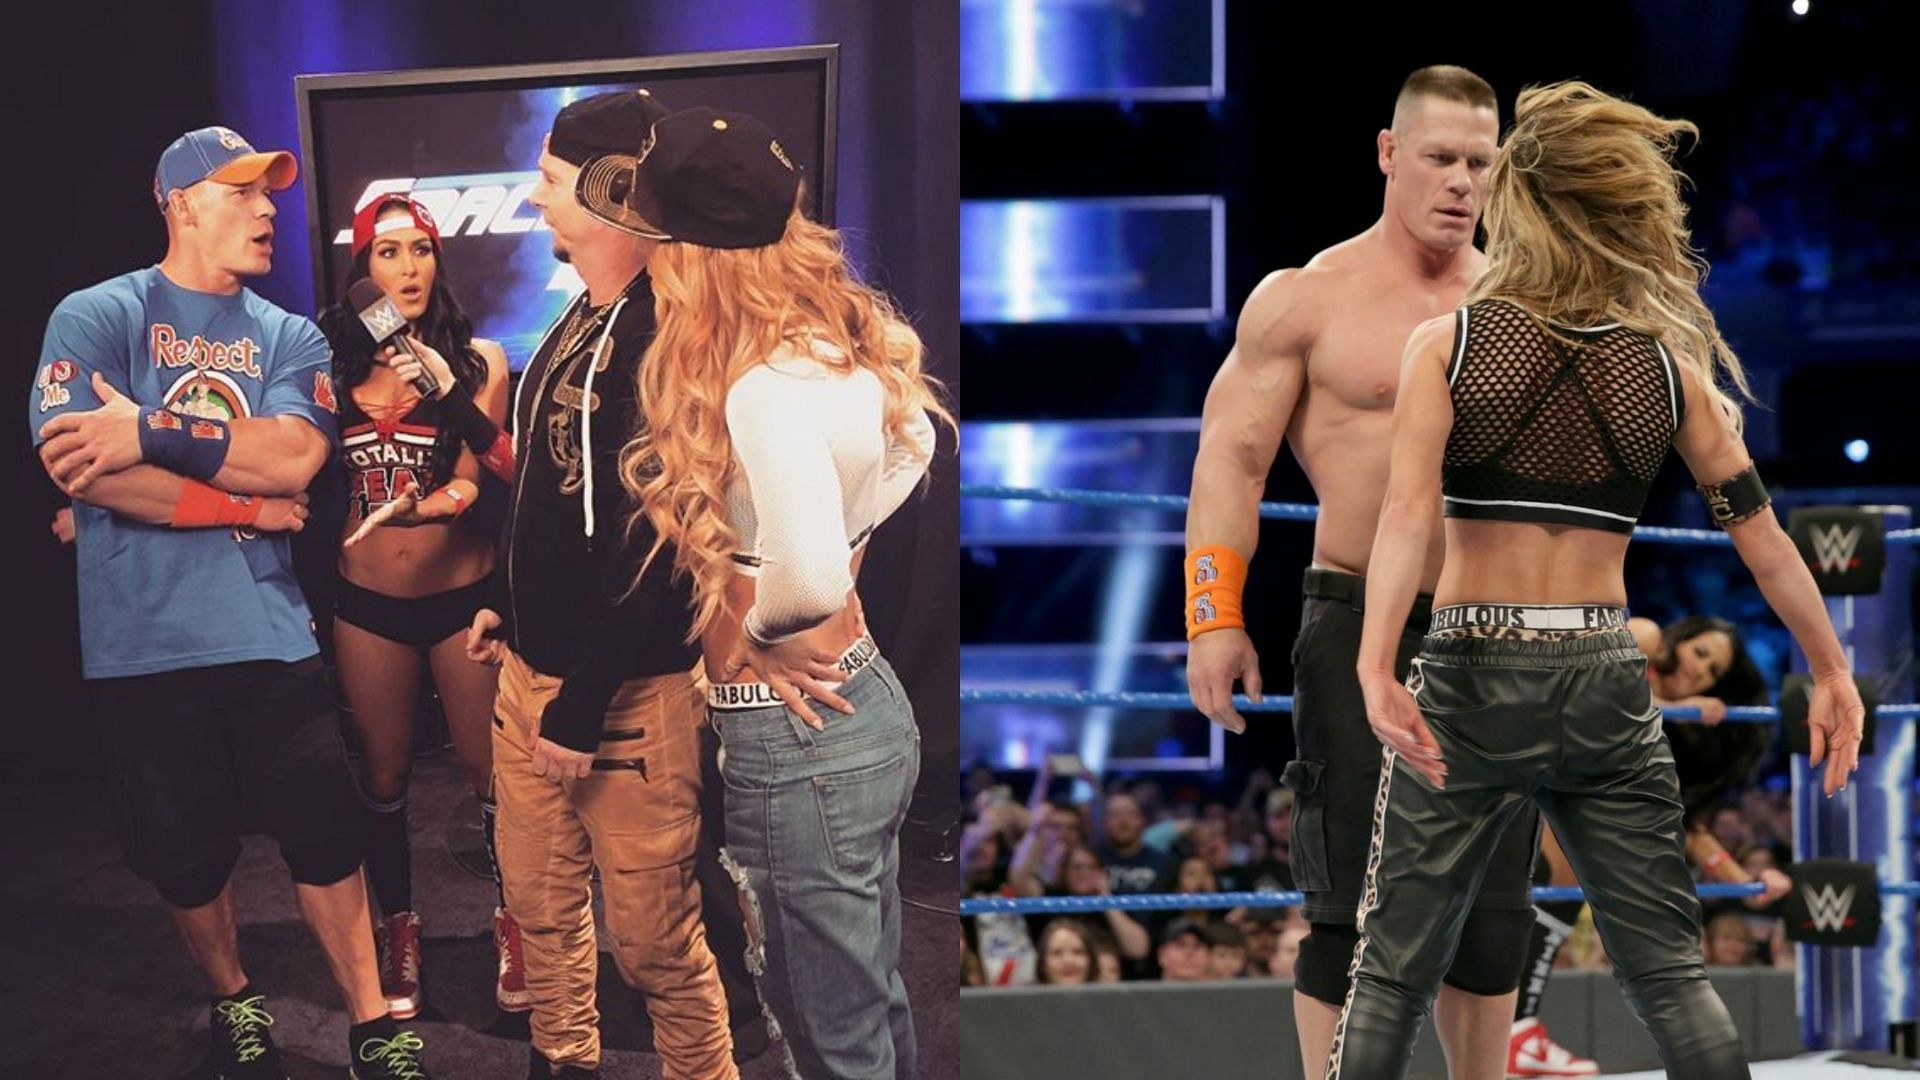 Rumors suggested that Carmella and John Cena dated a few years ago